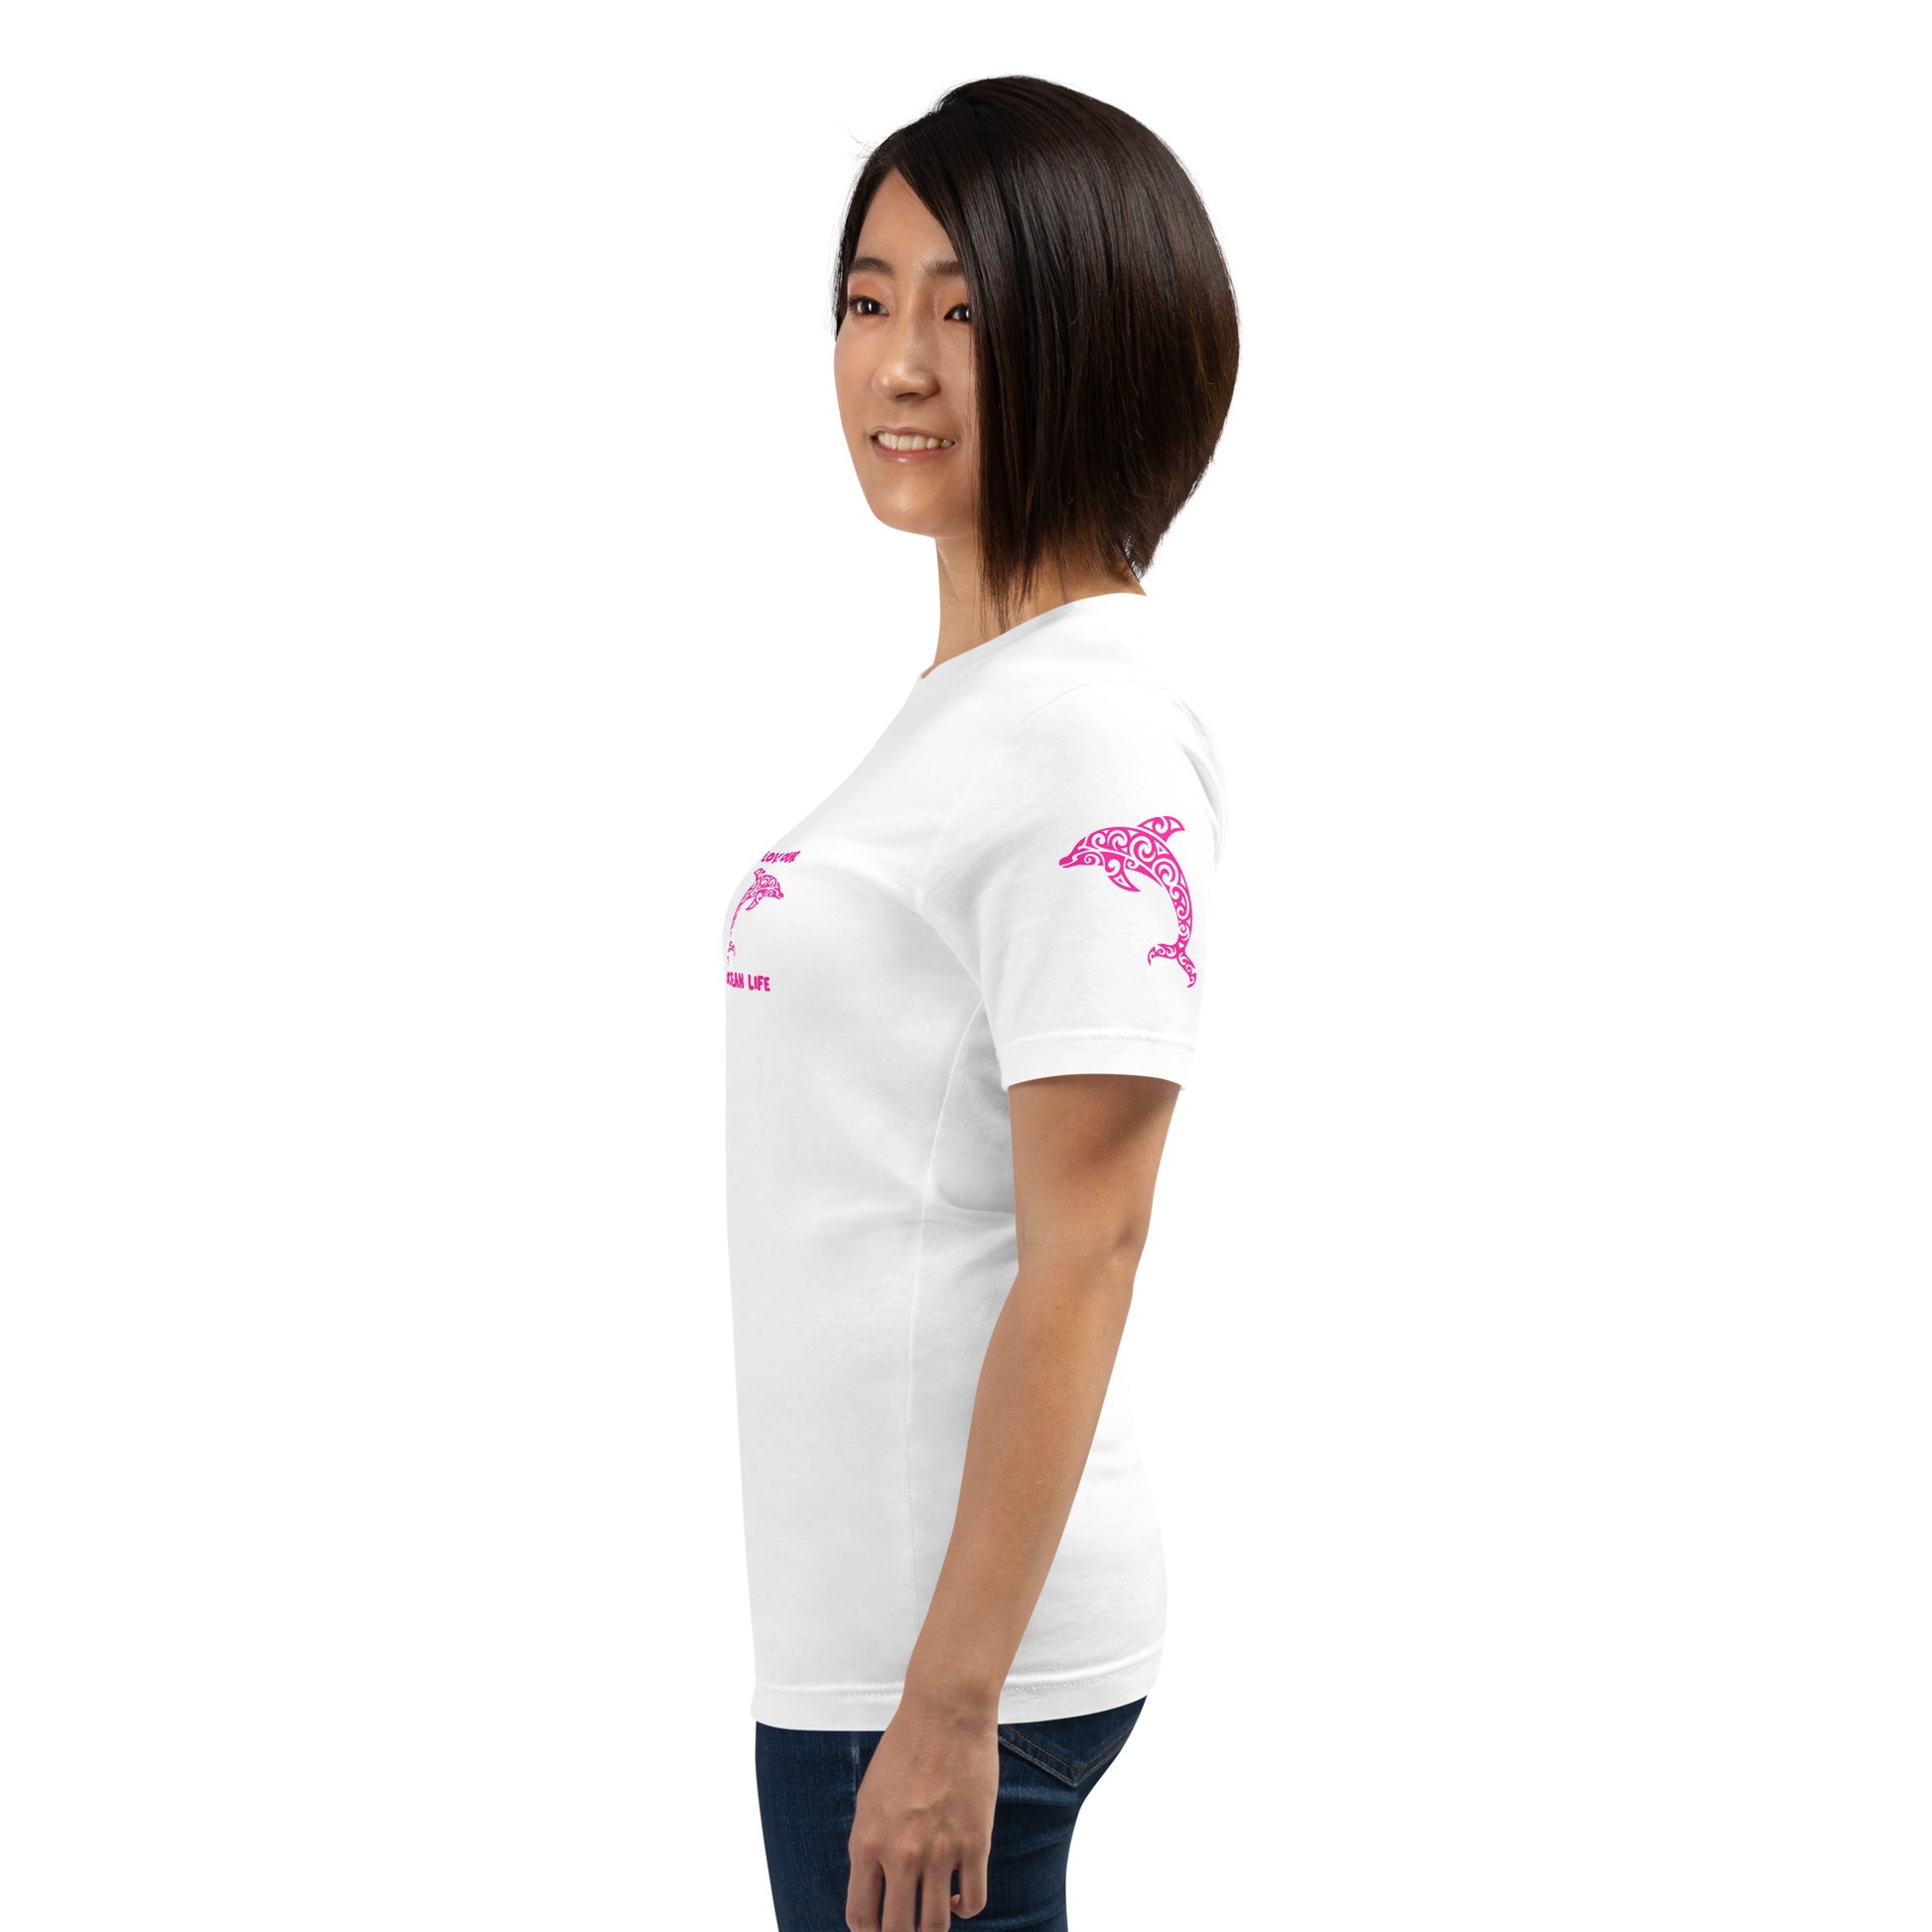 Polynesian Dolphin T-shirt For Men and Women Left Pink on White